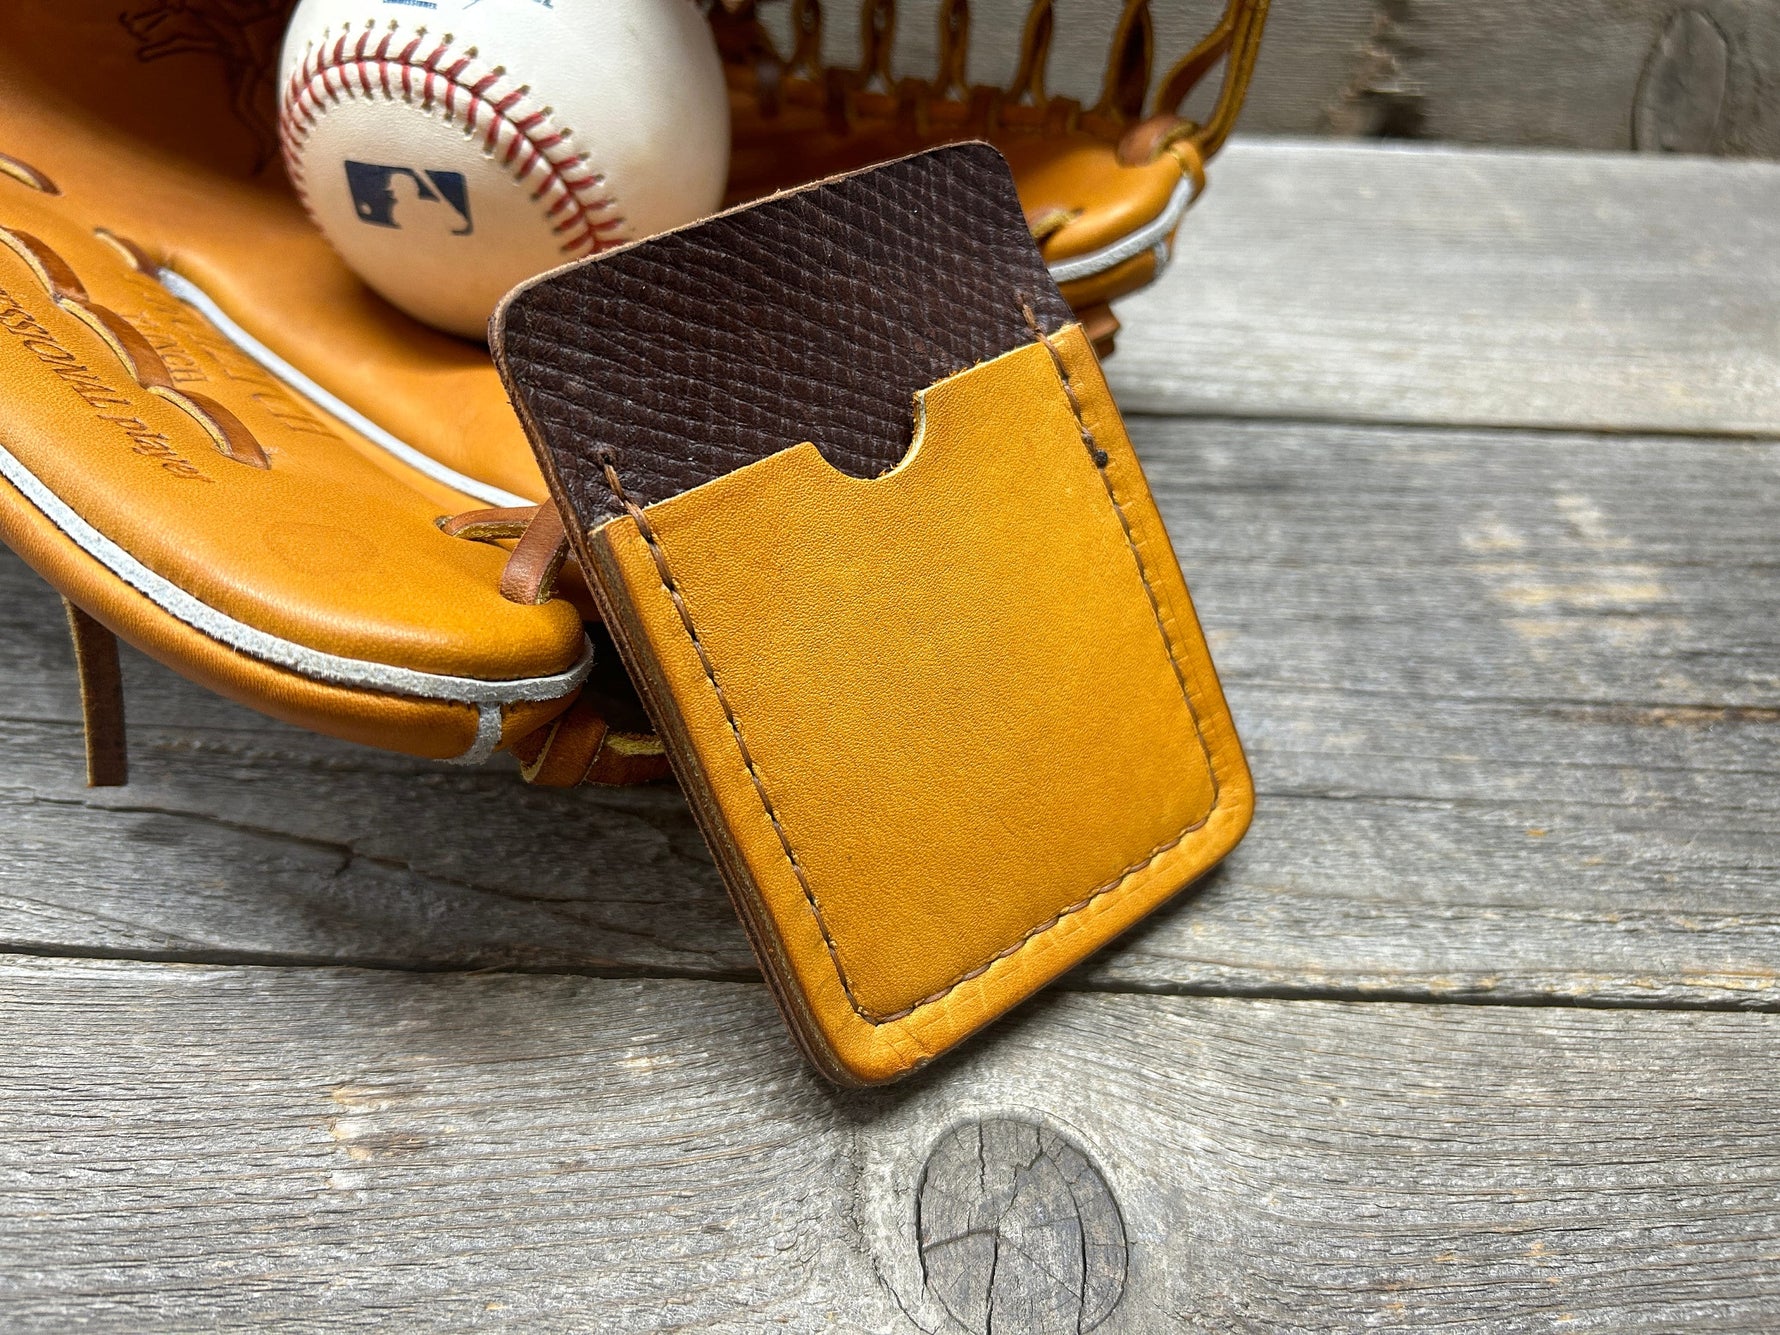 Marked down for Christmas!!! Horween Baseball Leather (Heart of the Hide) Top Loading Baseball Glove Wallet with Hidden 3rd Pocket!!